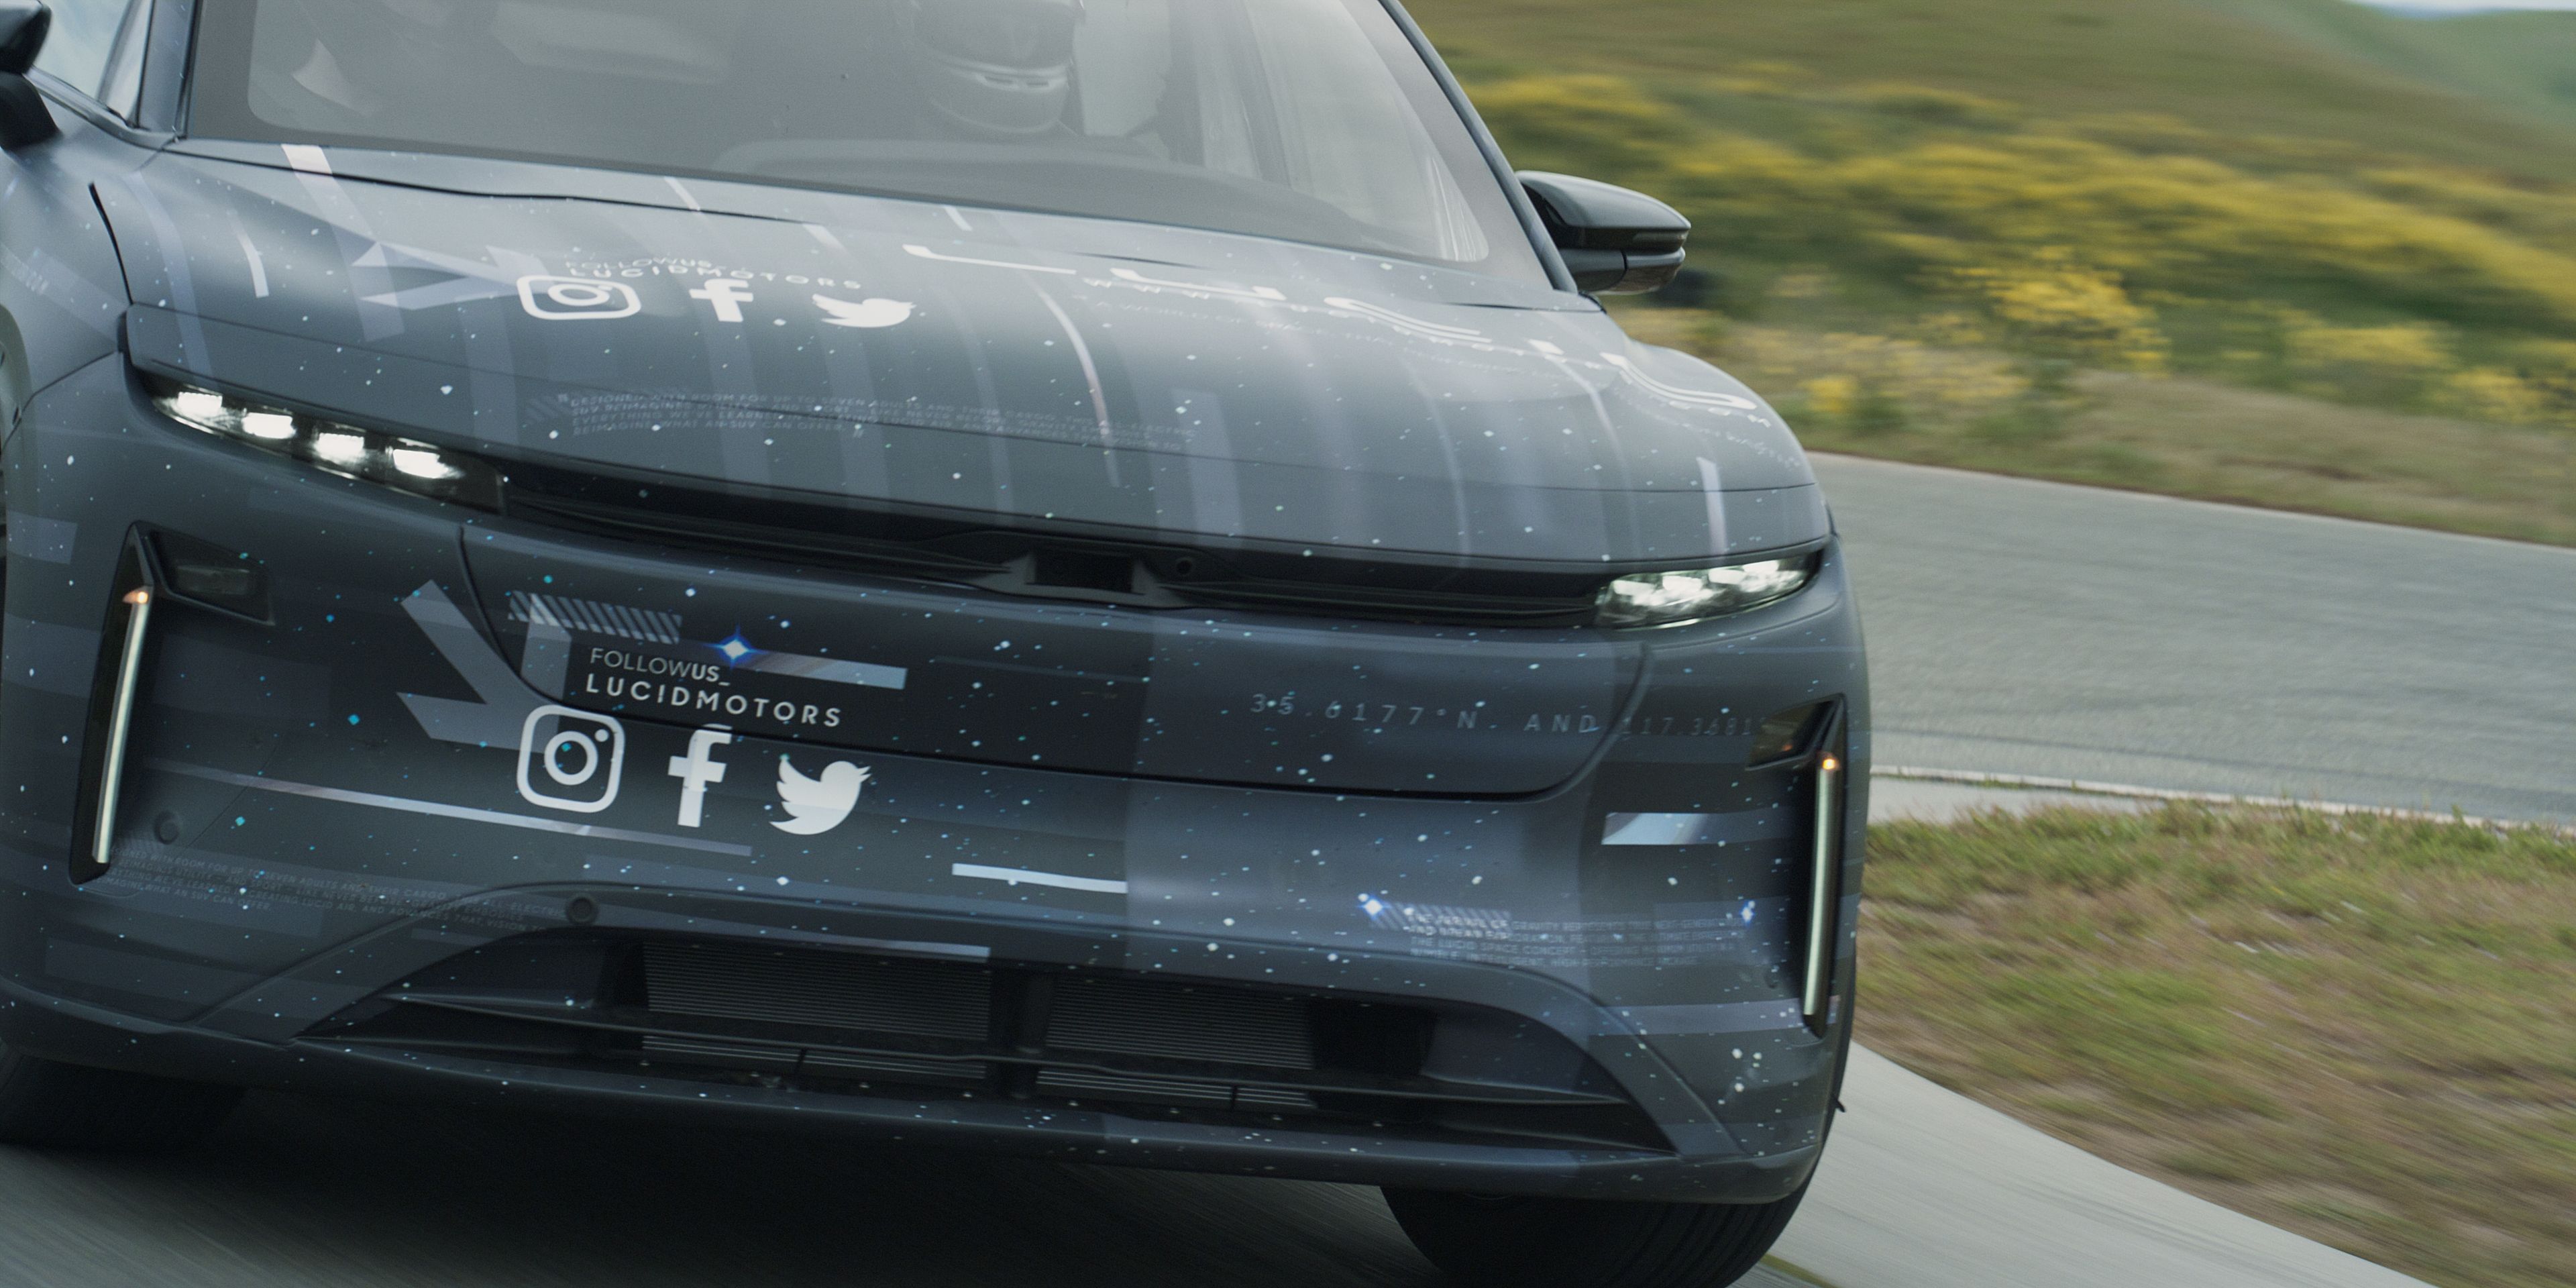 Here's the Lucid Gravity SUV Doing On-Road Testing